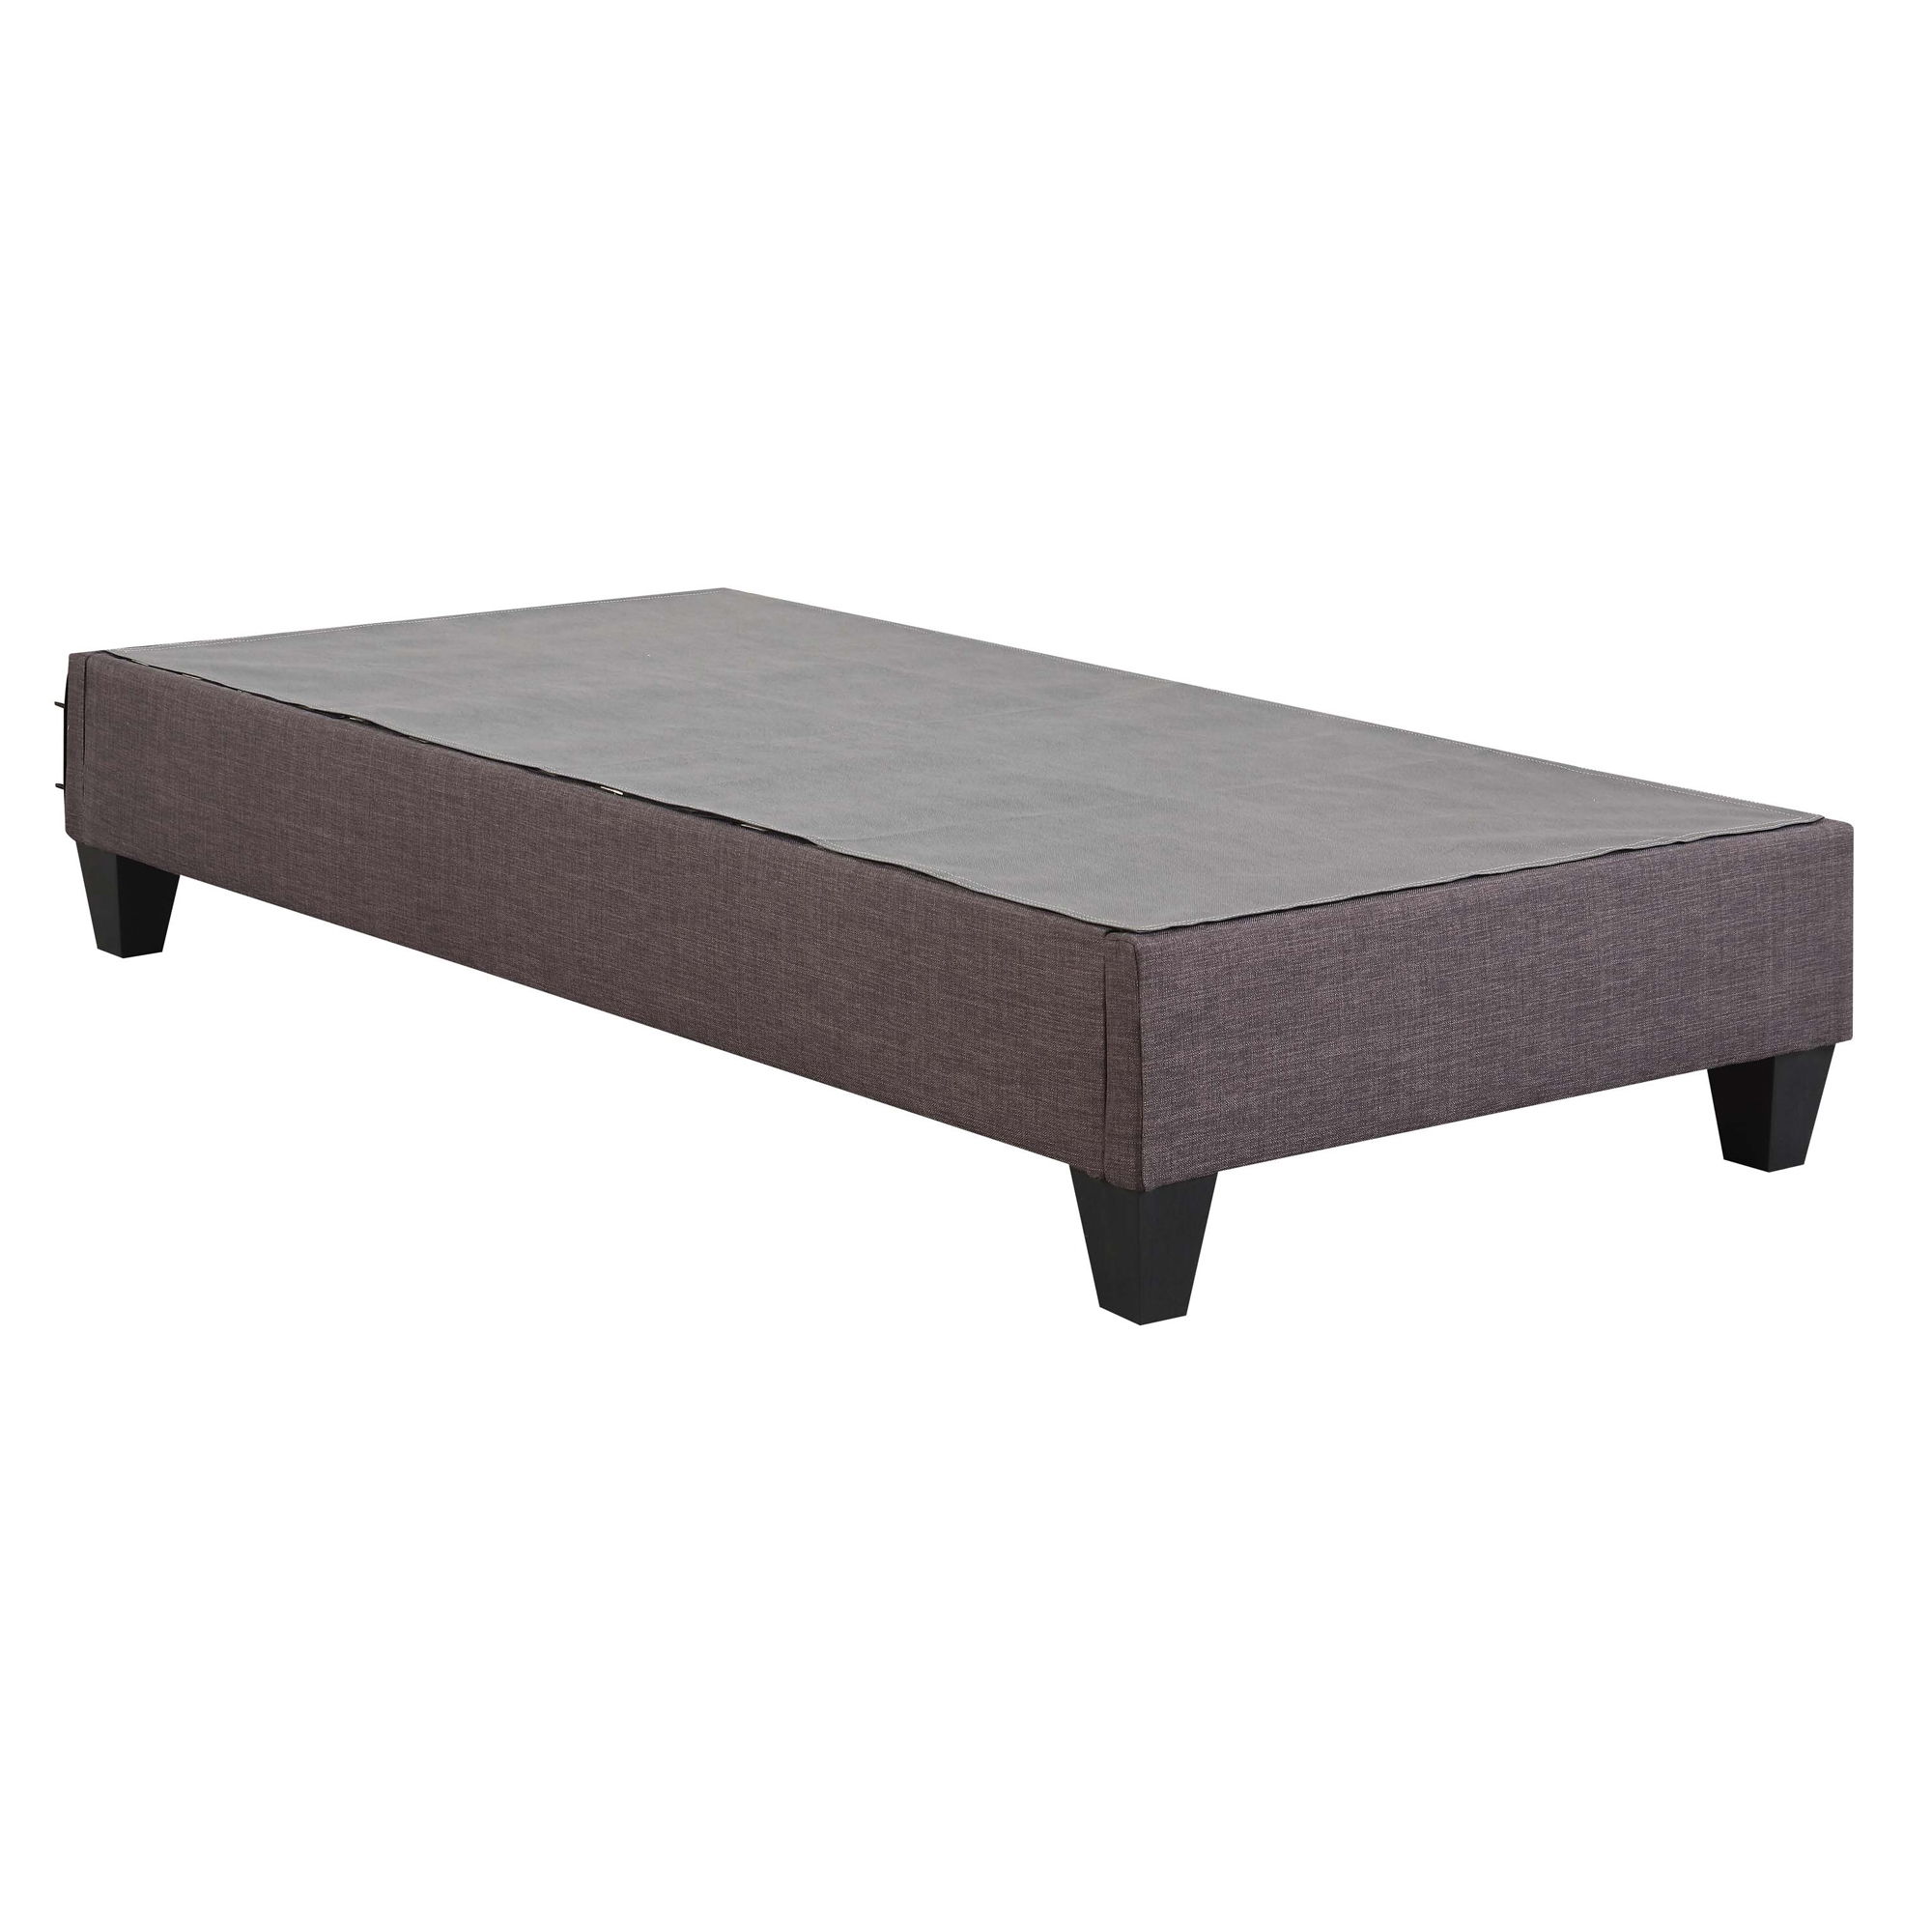 Abby - Twin Platform Bed - Charcoal